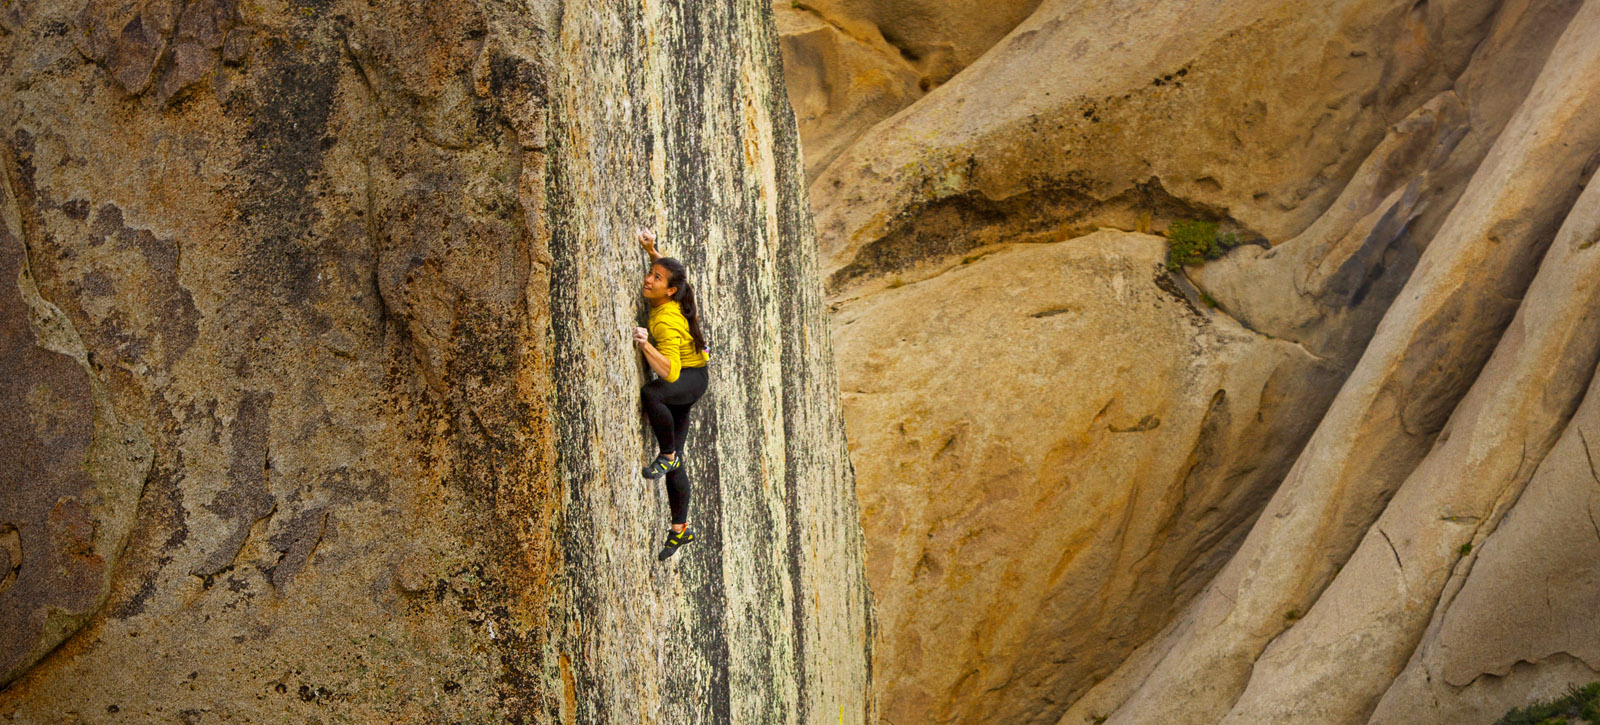 Reel Rock 14 - coming to TCA this month! - The Climbing Academy